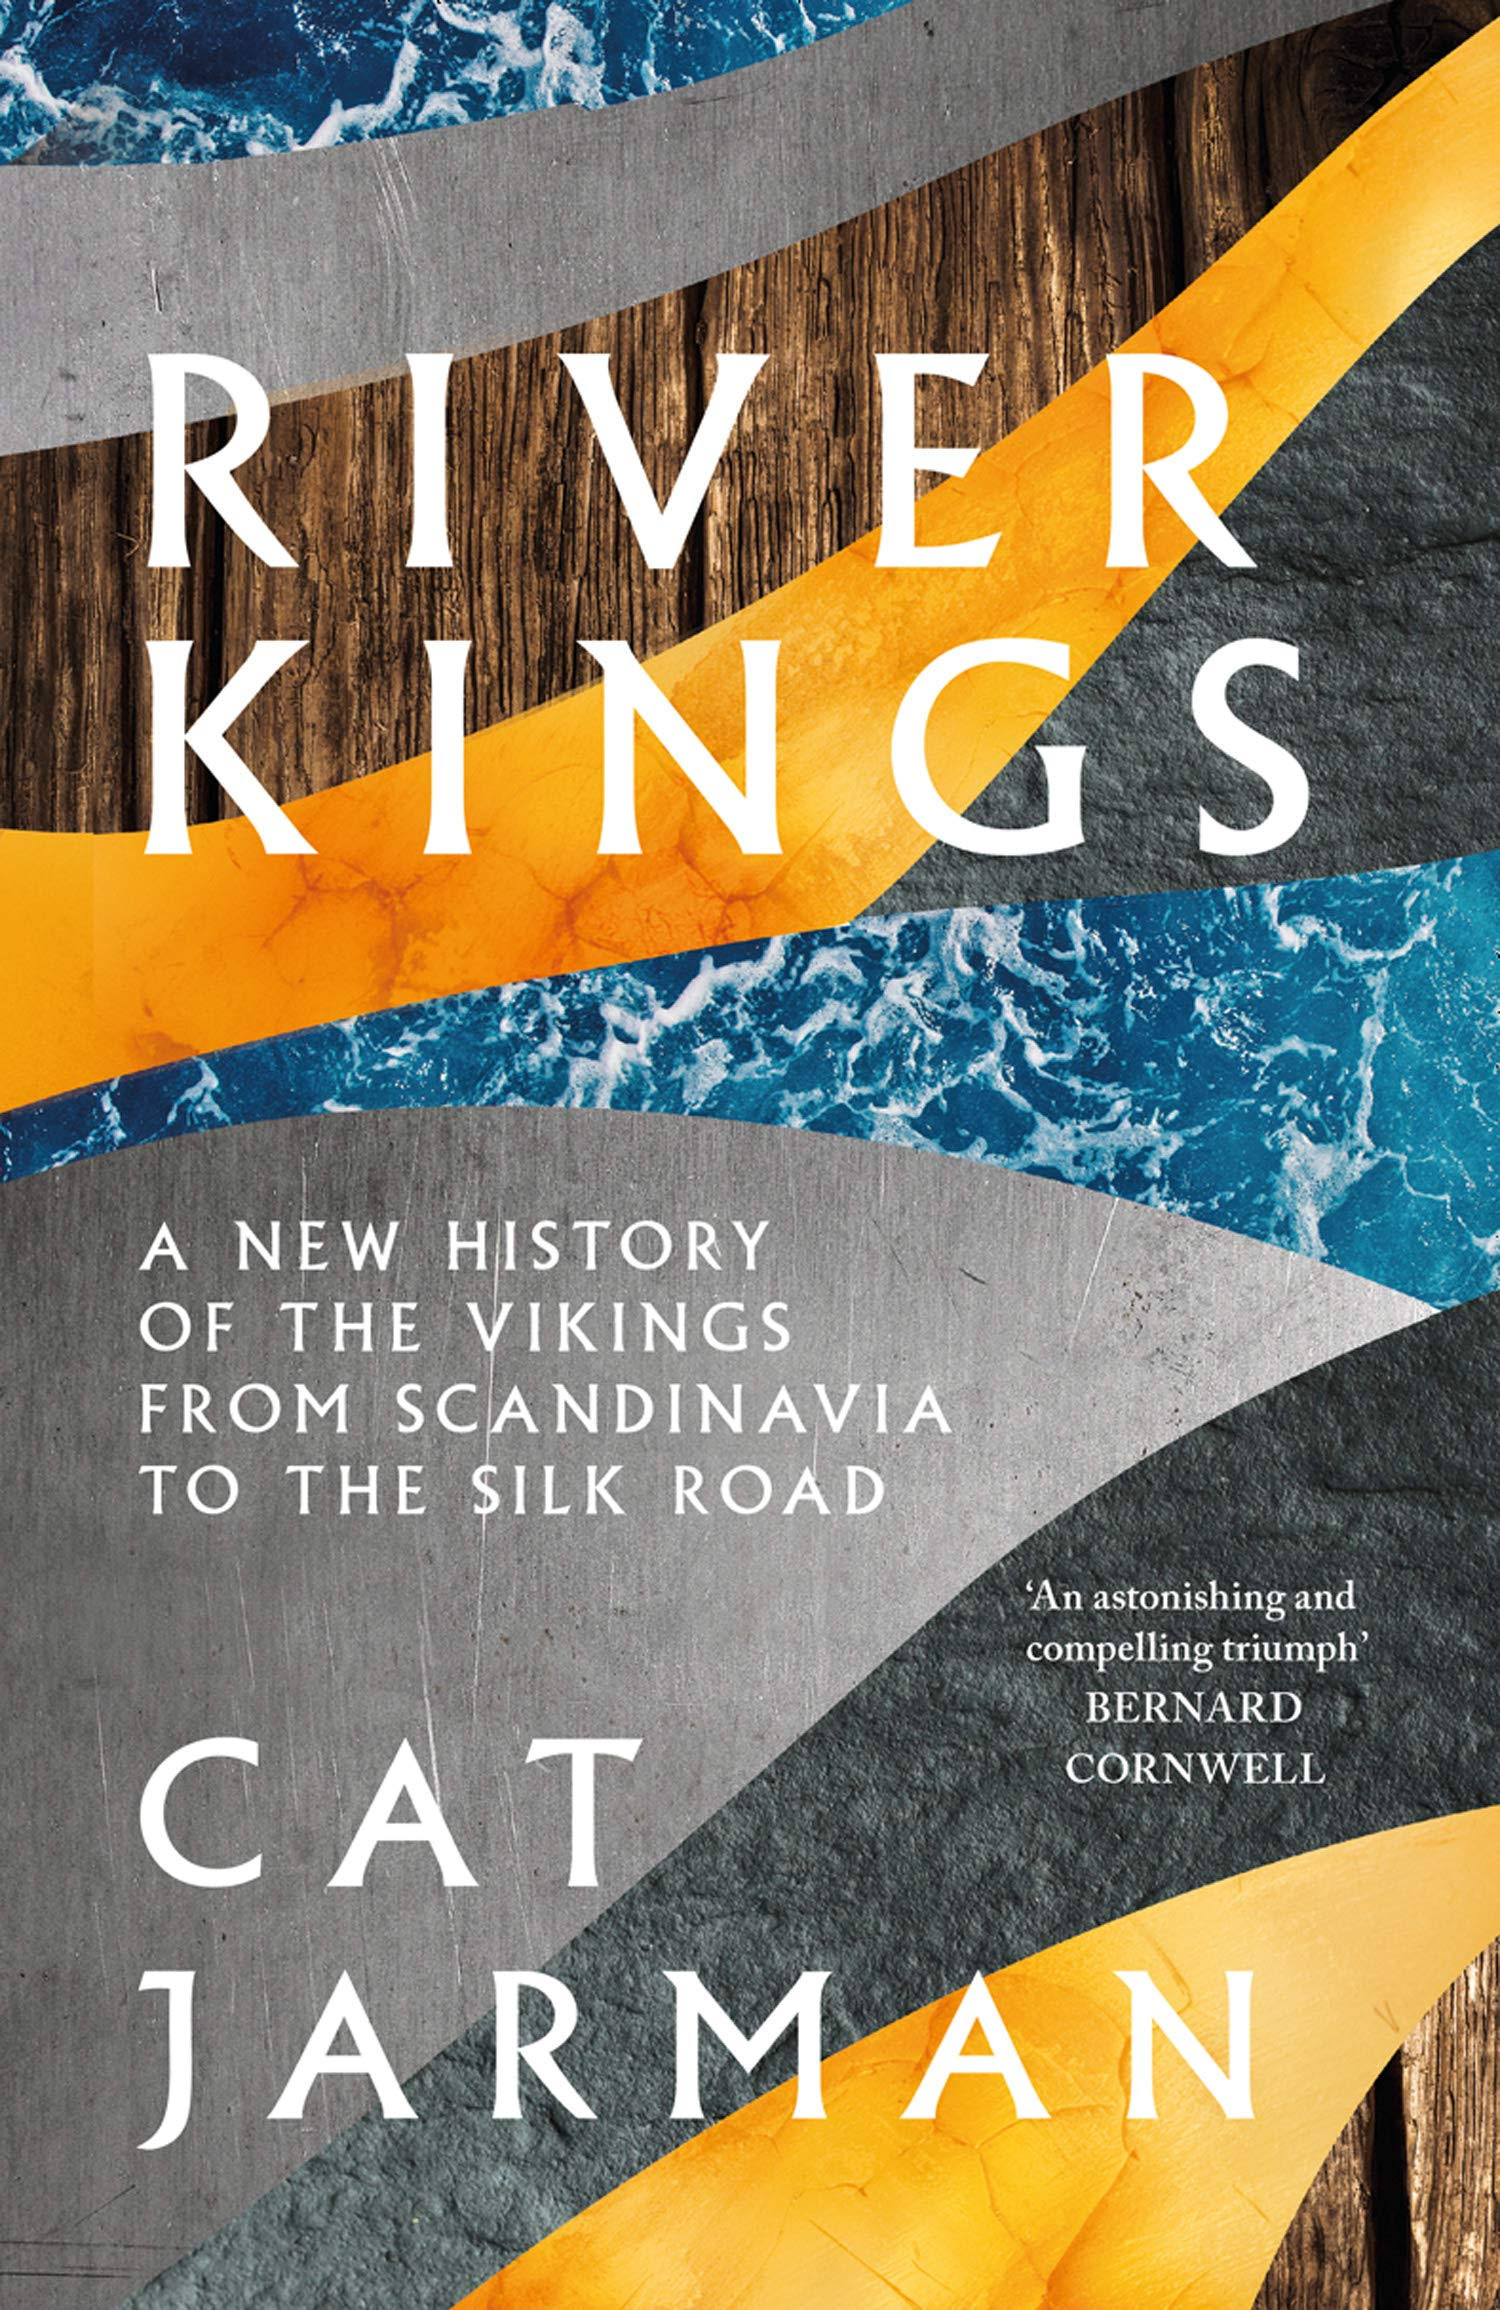 River Kings: A New History of Vikings from Scandinavia to the Silk Roads [Book]